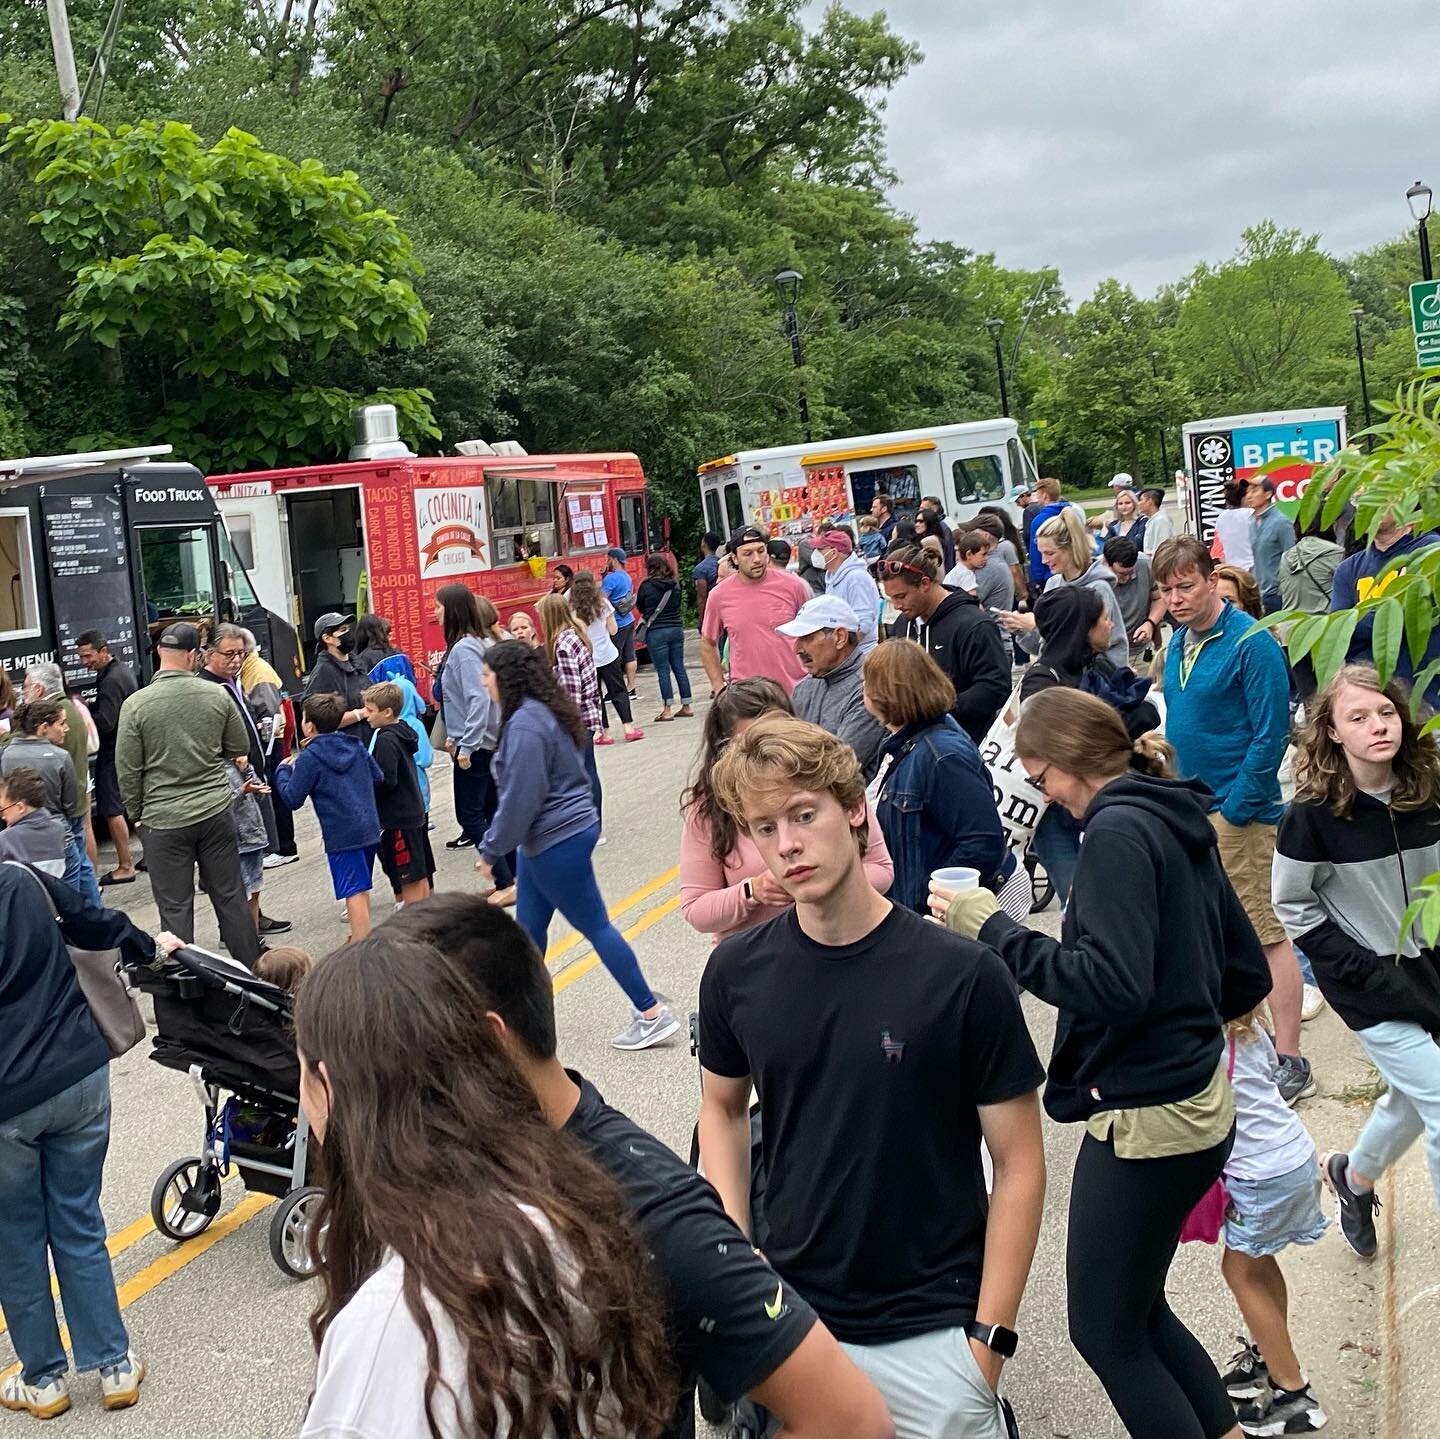 We are so excited for tonight&rsquo;s Ravinia Food Truck Thursdays event! We are packing extra food to avoid selling out&hellip;but come early to avoid long lines! Jens Jensen Park in Highland Park, 4:30-8:30 PM